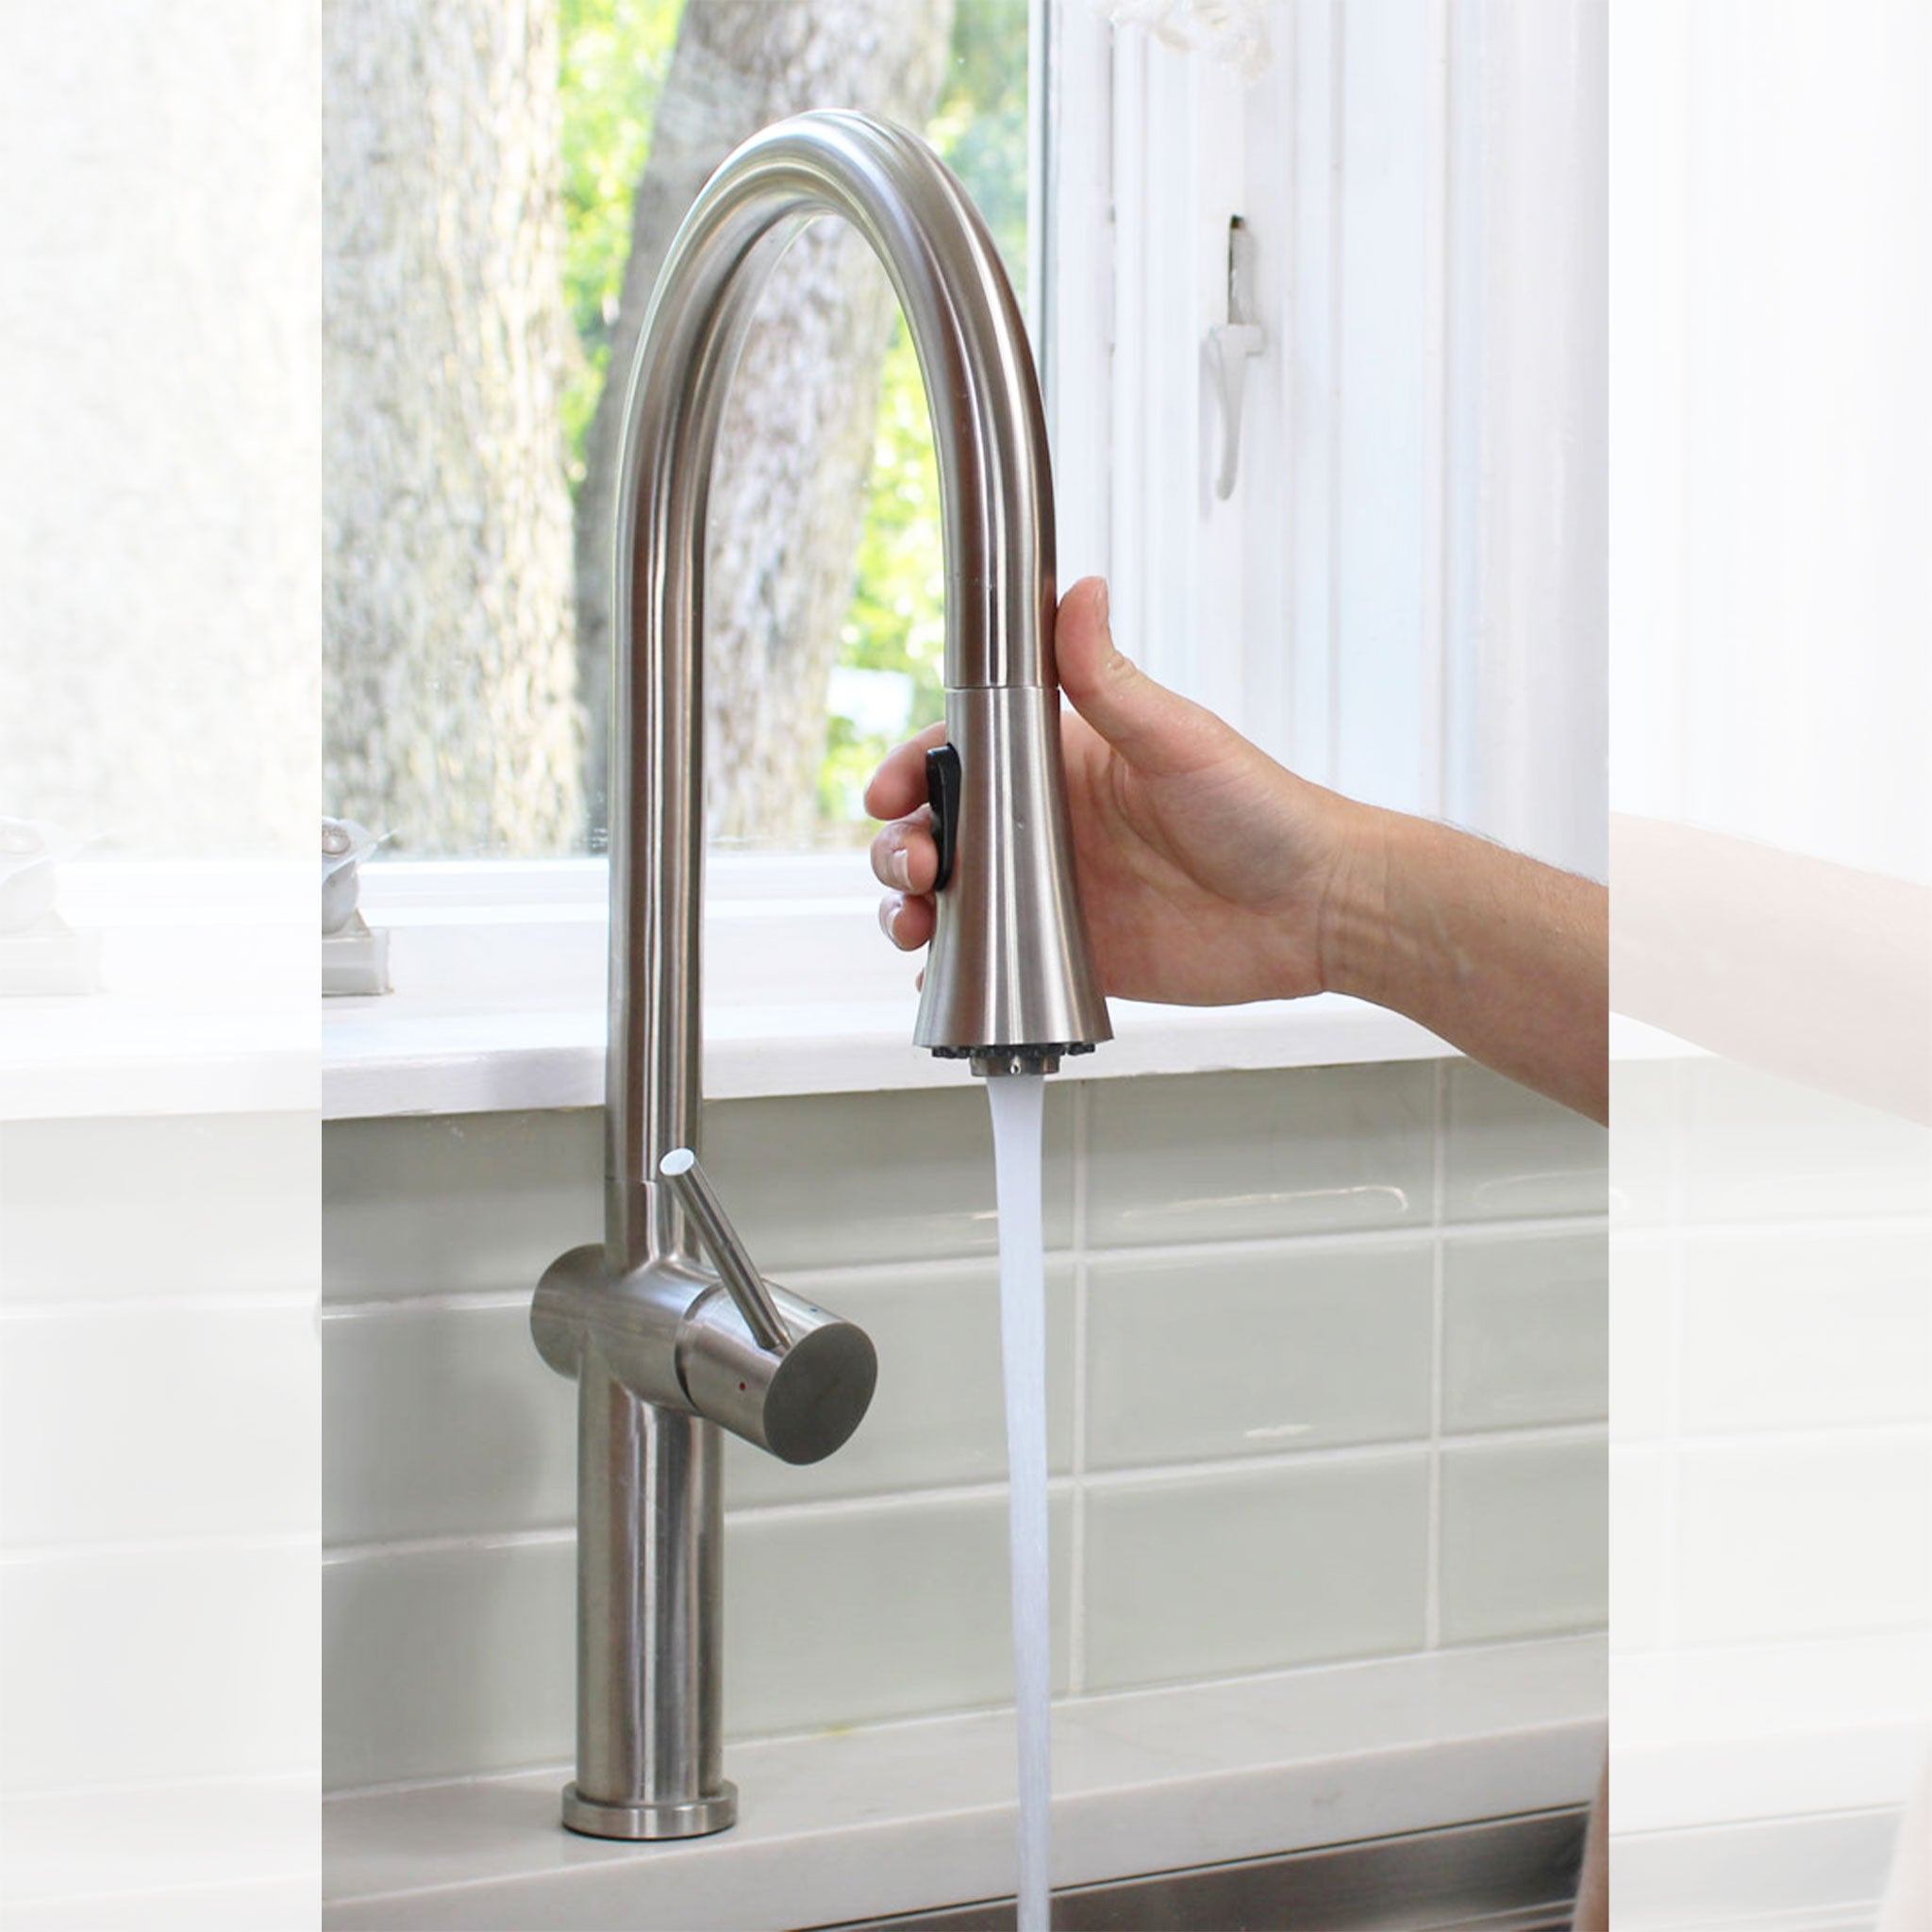 Bella Kitchen Faucet from Create Good Sinks